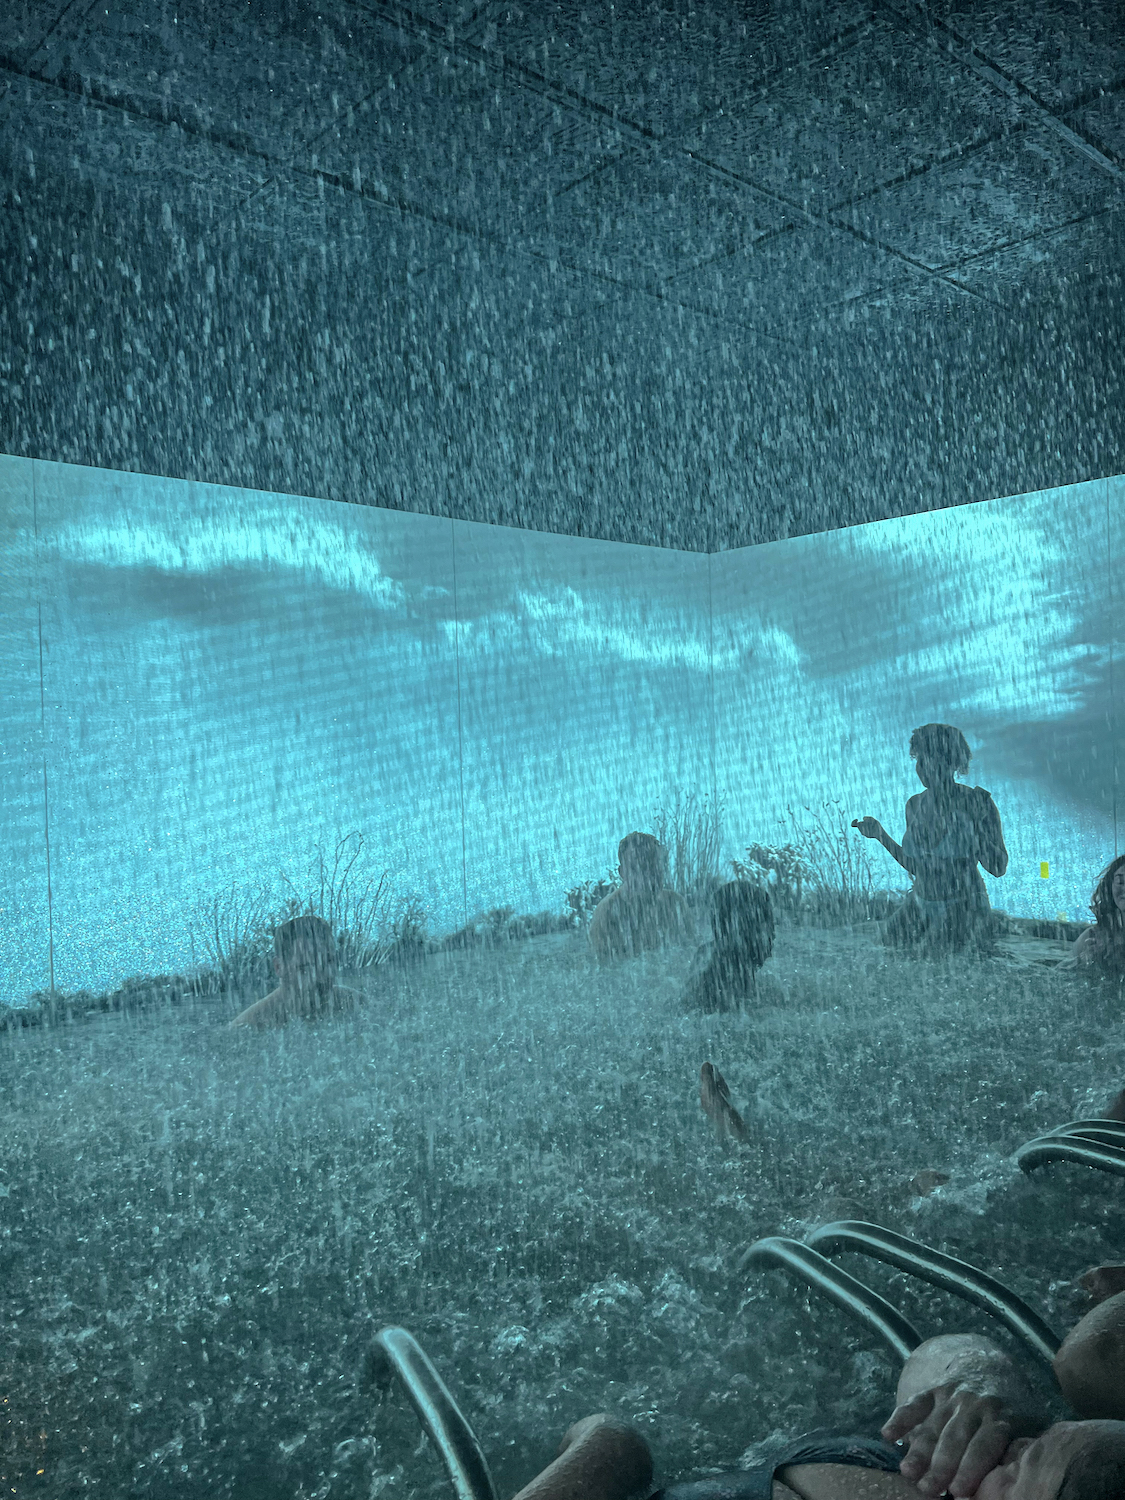 The Storm Room: A TikTok-famous room of the spa where LED screens simulate a thunderstorm with furious rain coming from its ceiling